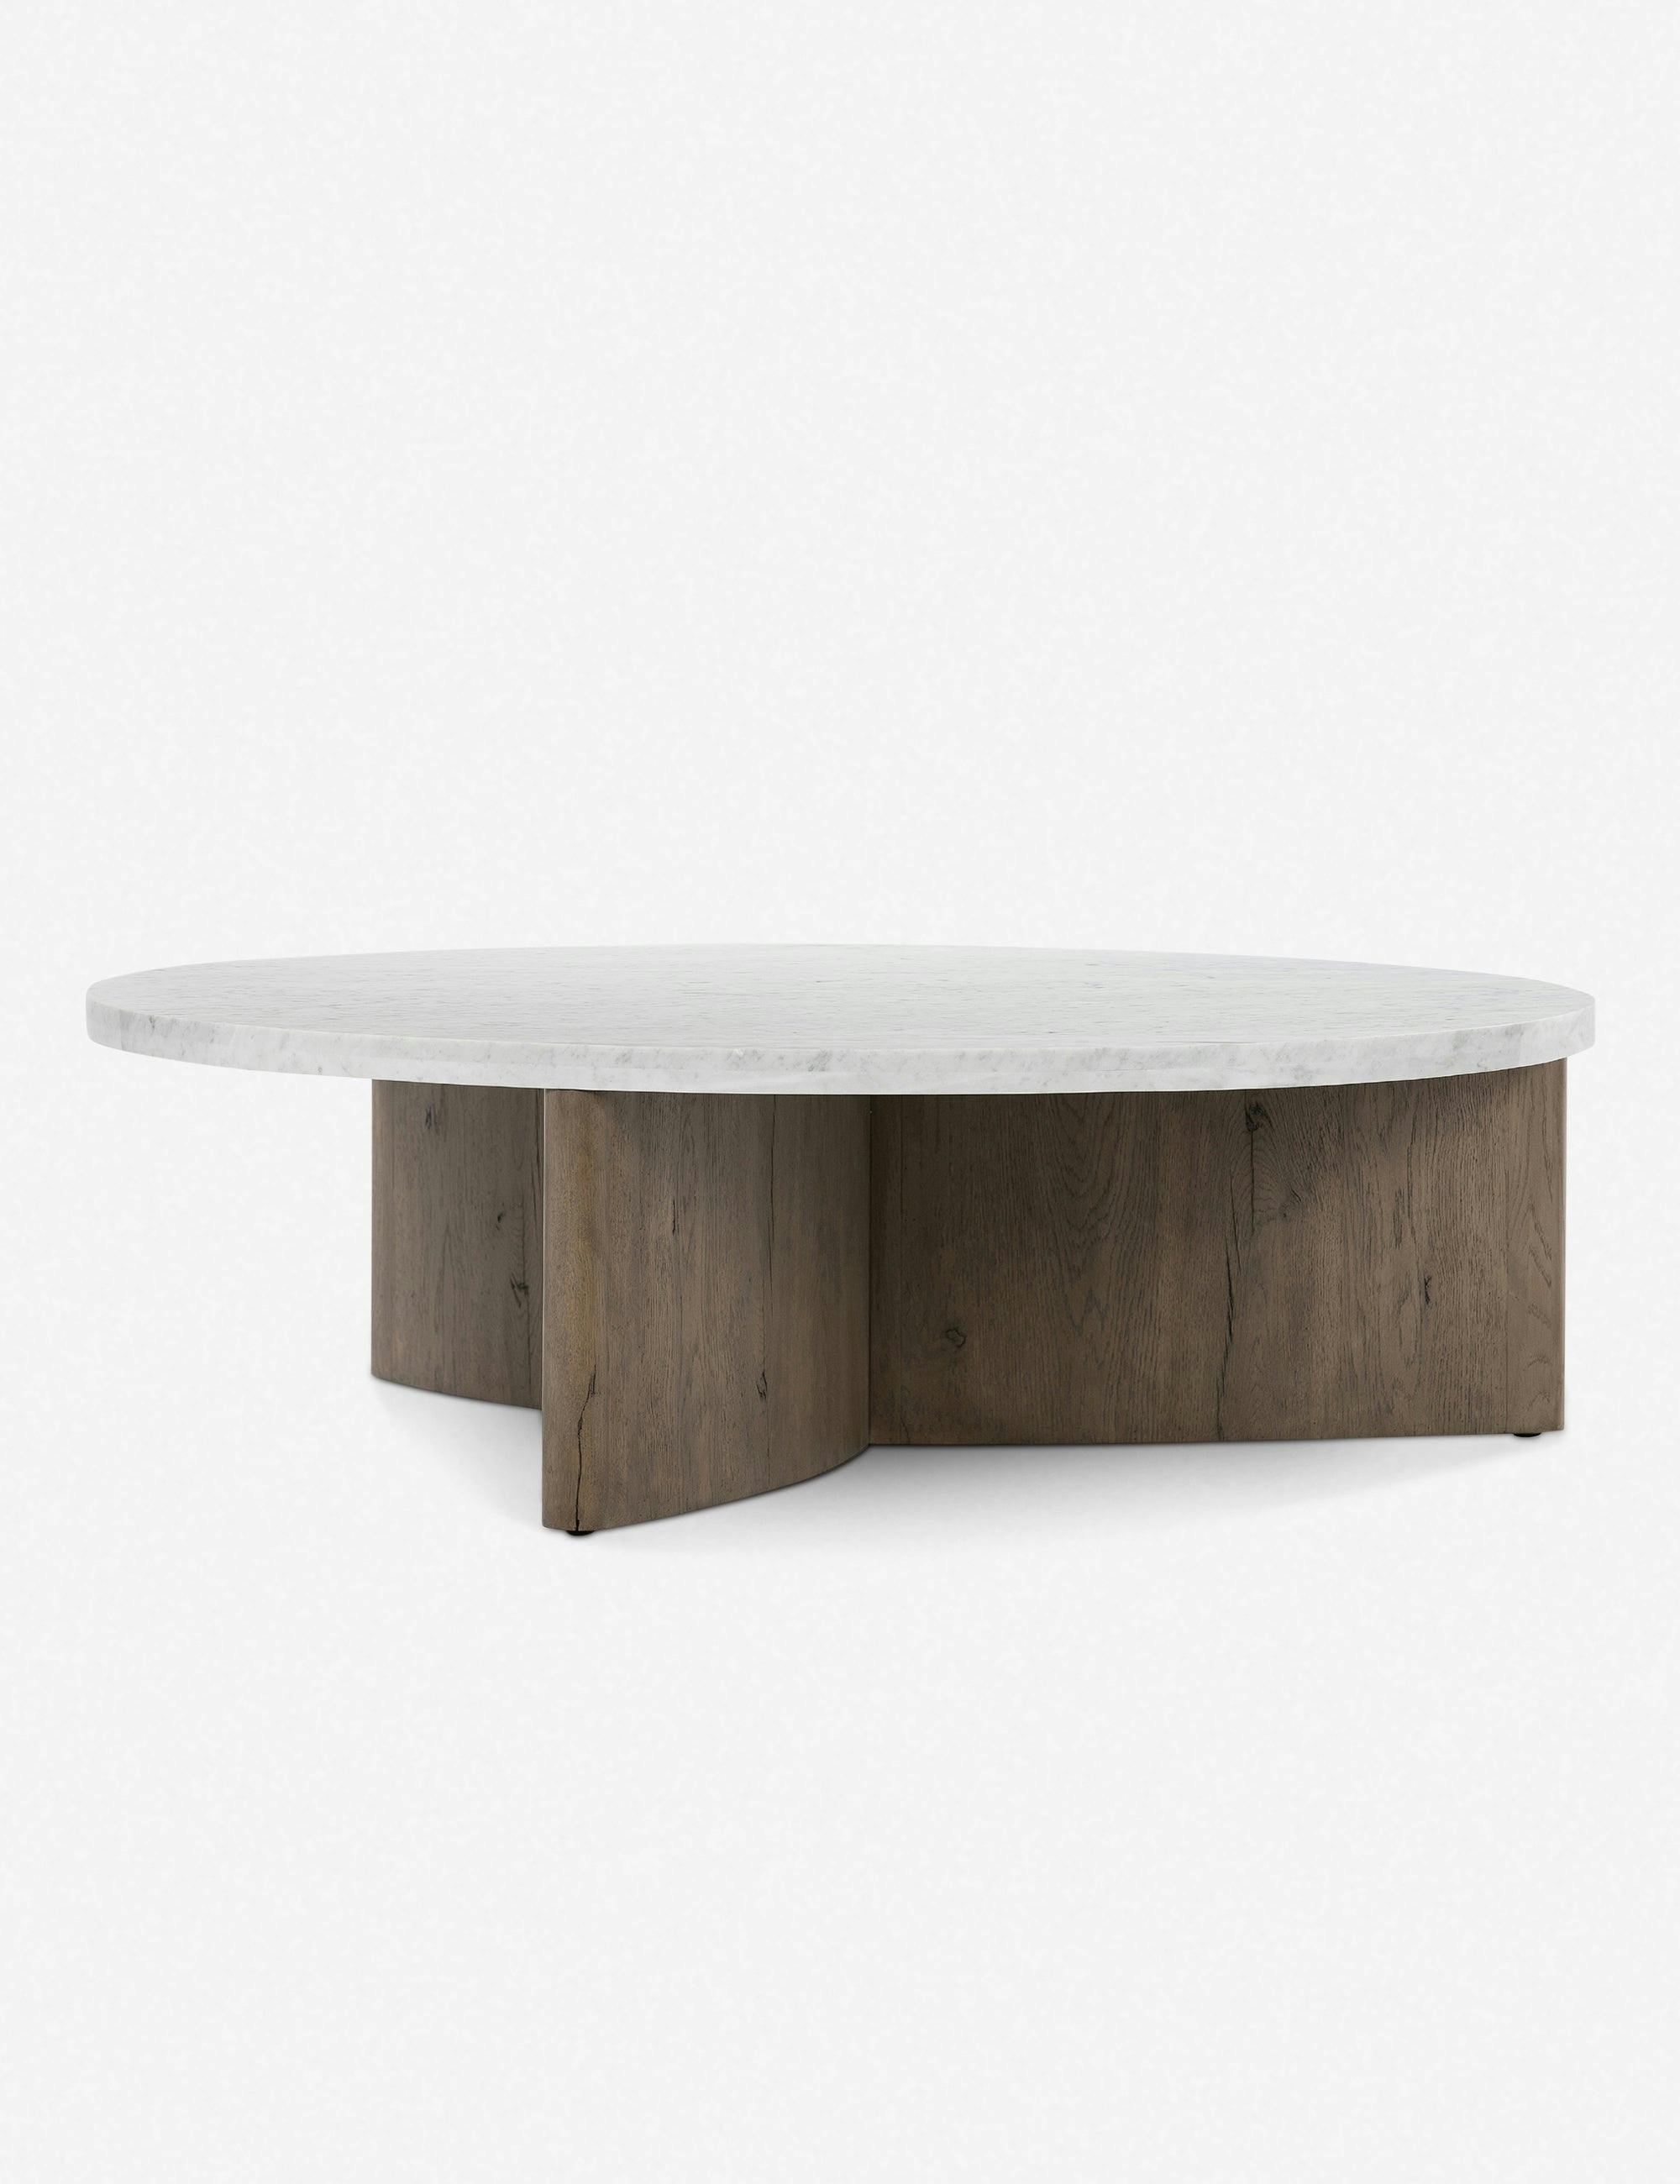 Contemporary Rustic Grey Oak & White Marble Round Coffee Table